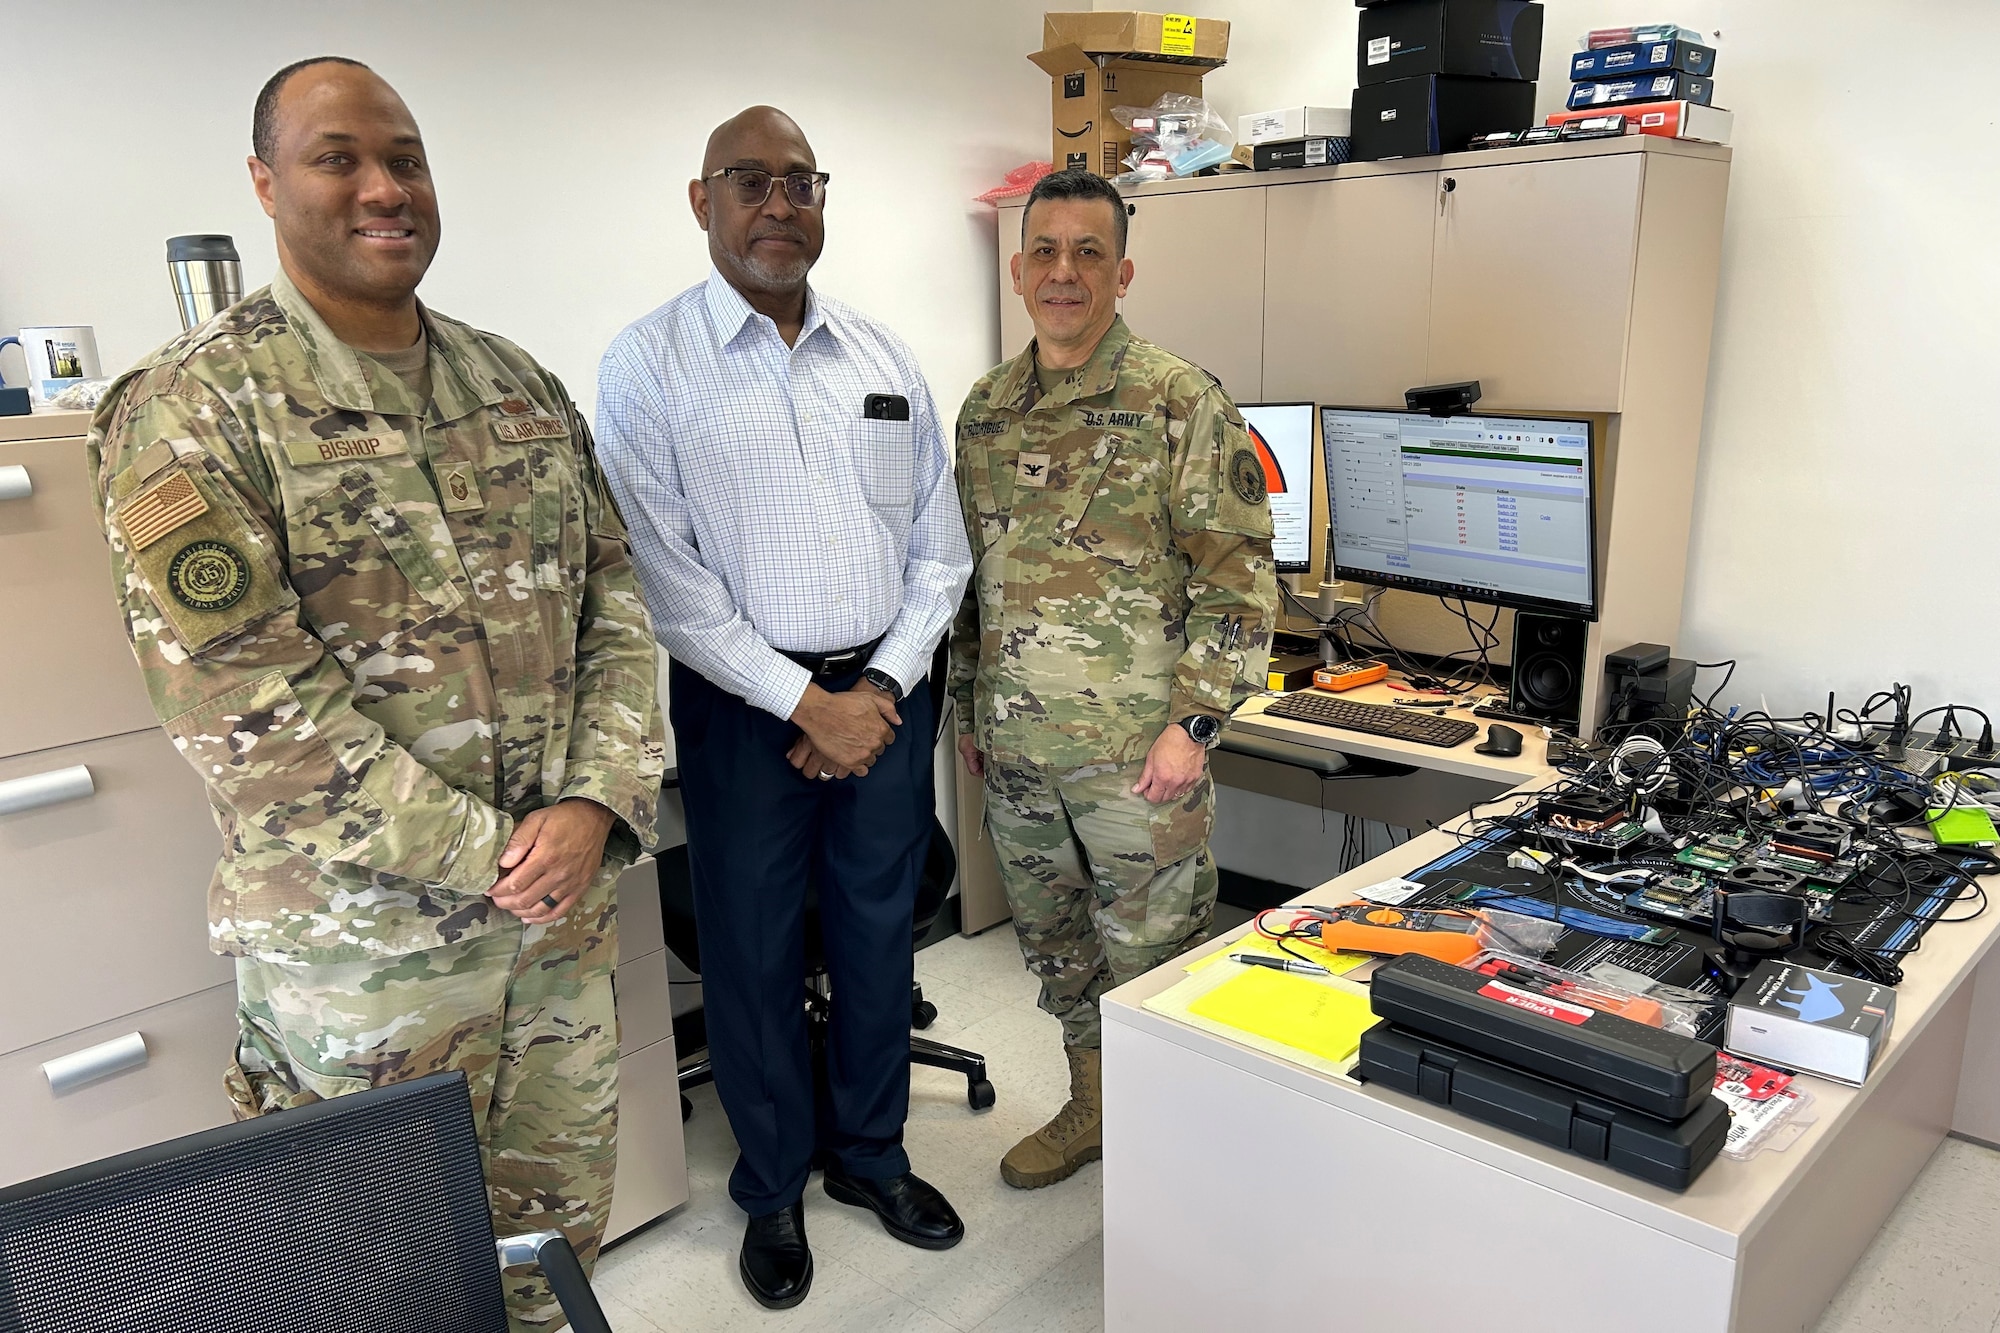 Two Soldiers in Uniform and a University Professor pose for a group shot behind a desk, with computer parts and cables